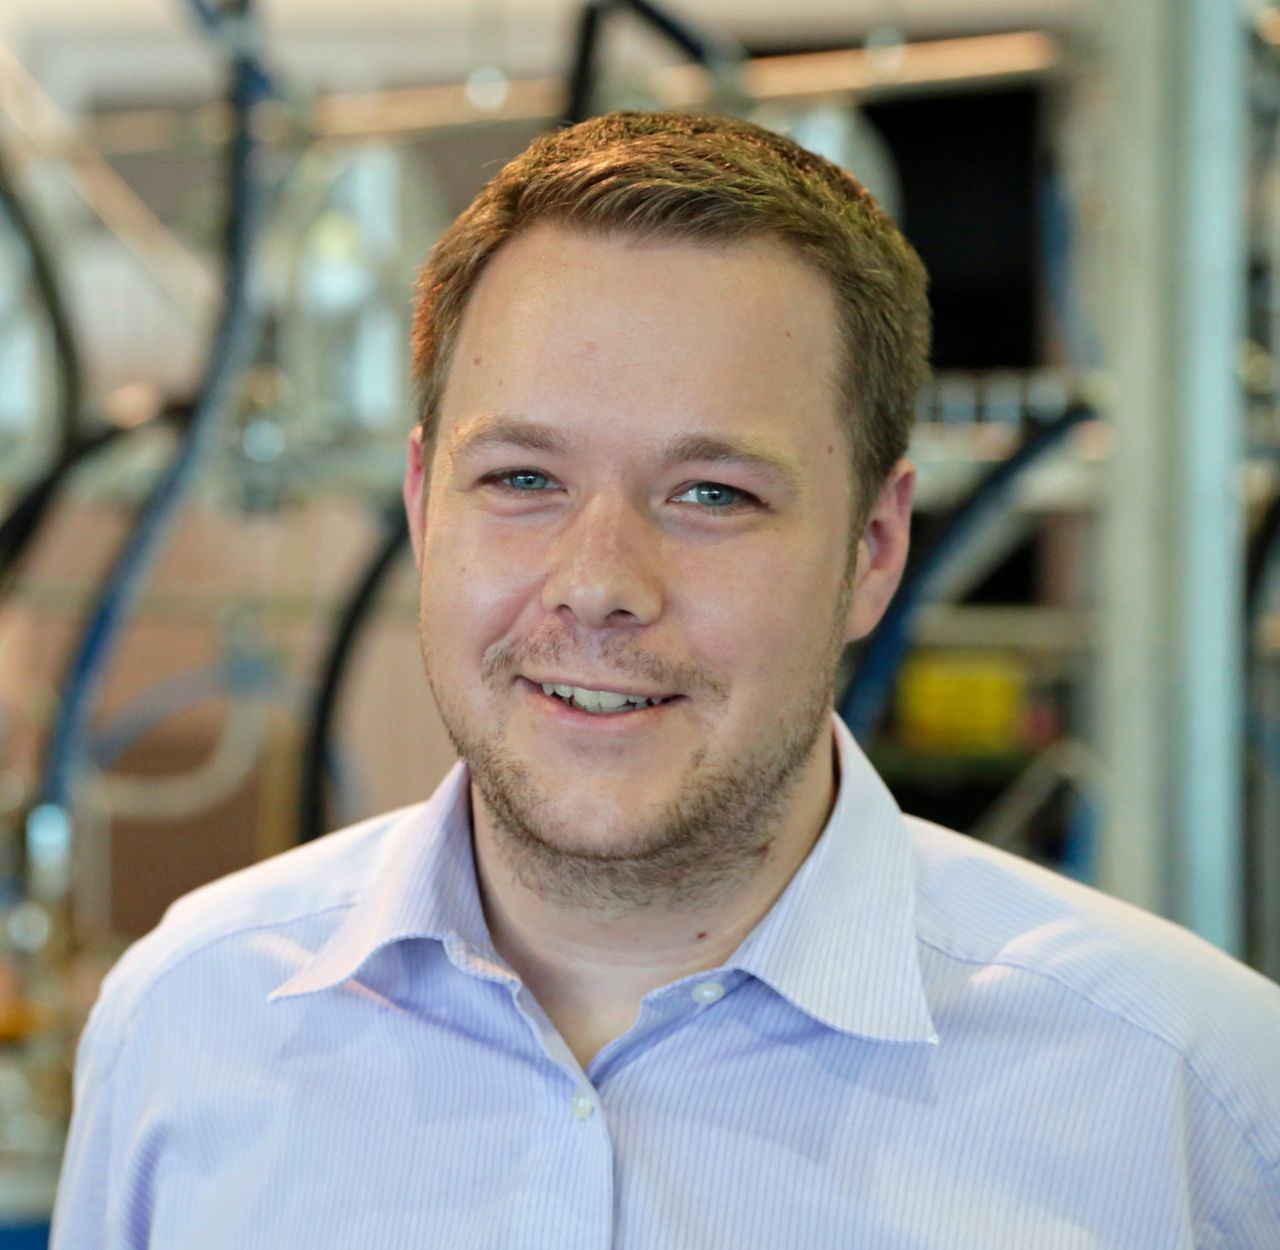 Sebastian Noll is a chemical engineer at Füll Systembau GmbH